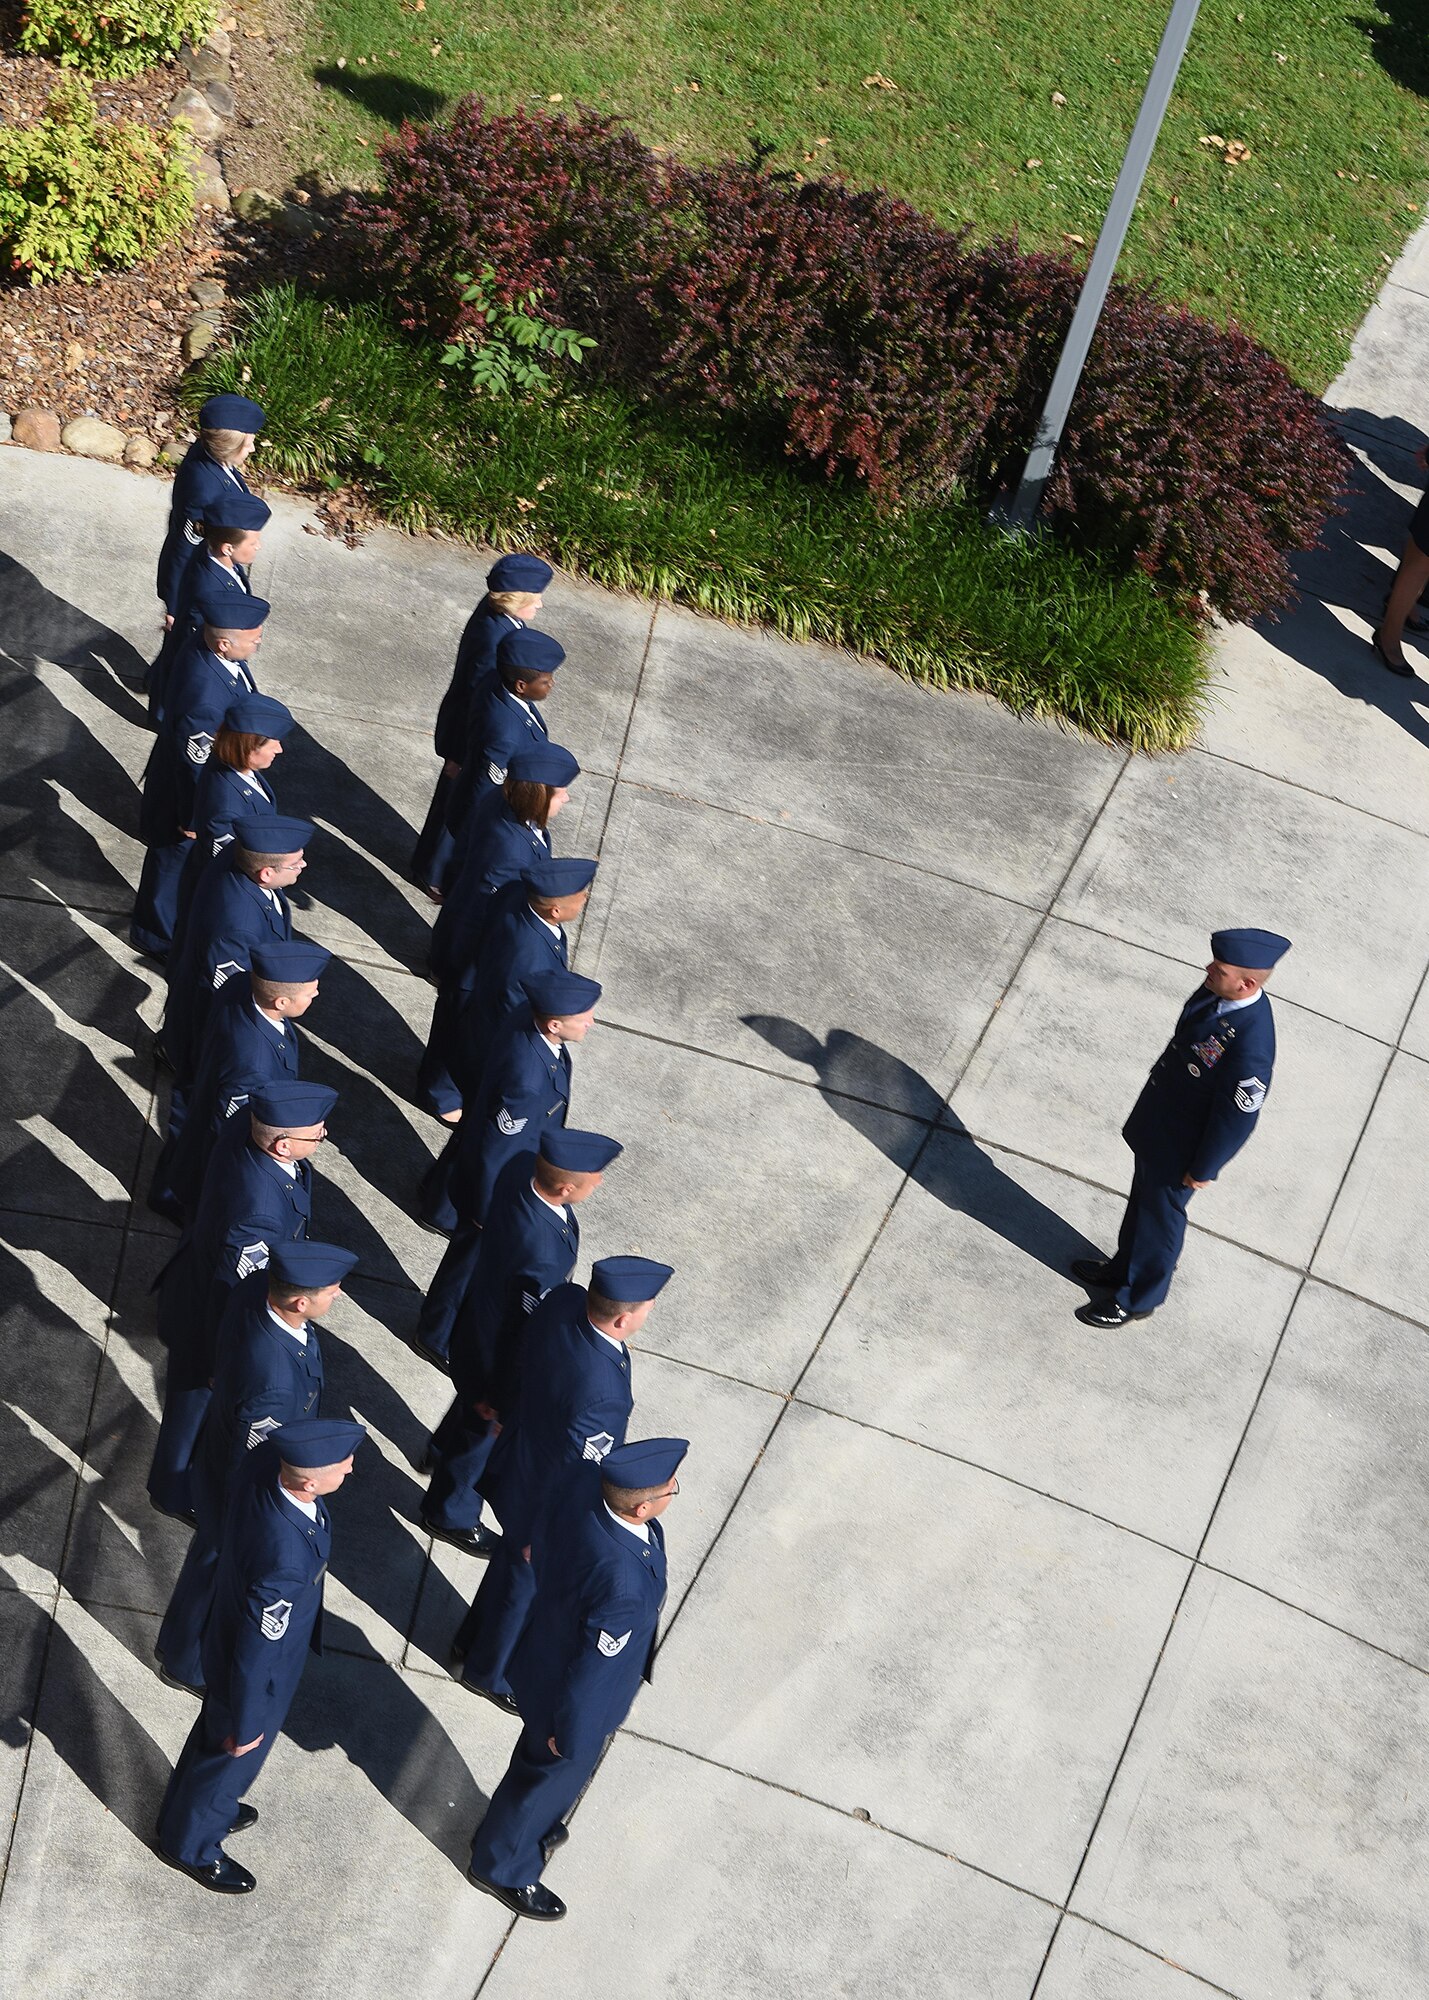 Faculty and staff assigned to the Air National Guard’s I.G. Brown Training and Education Center in East Tennessee formed ranks during a retreat ceremony with others at the Class 17-4 NCO Academy graduation May 16, 2017. Military retreat ceremonies pay respect to the Flag when it is lowered at the end of a duty day and can include group formation, bugle call, salute and flag folding, among other traditions. TEC service members recite the Airman’s Creed at the end of their flag ceremonies. TEC includes the Air Force’s largest enlisted professional military education center, which educates thousands of active duty, National Guard, Reserve Command and international students every year. (U.S. Air National Guard photo by Master Sgt. Mike R. Smith)